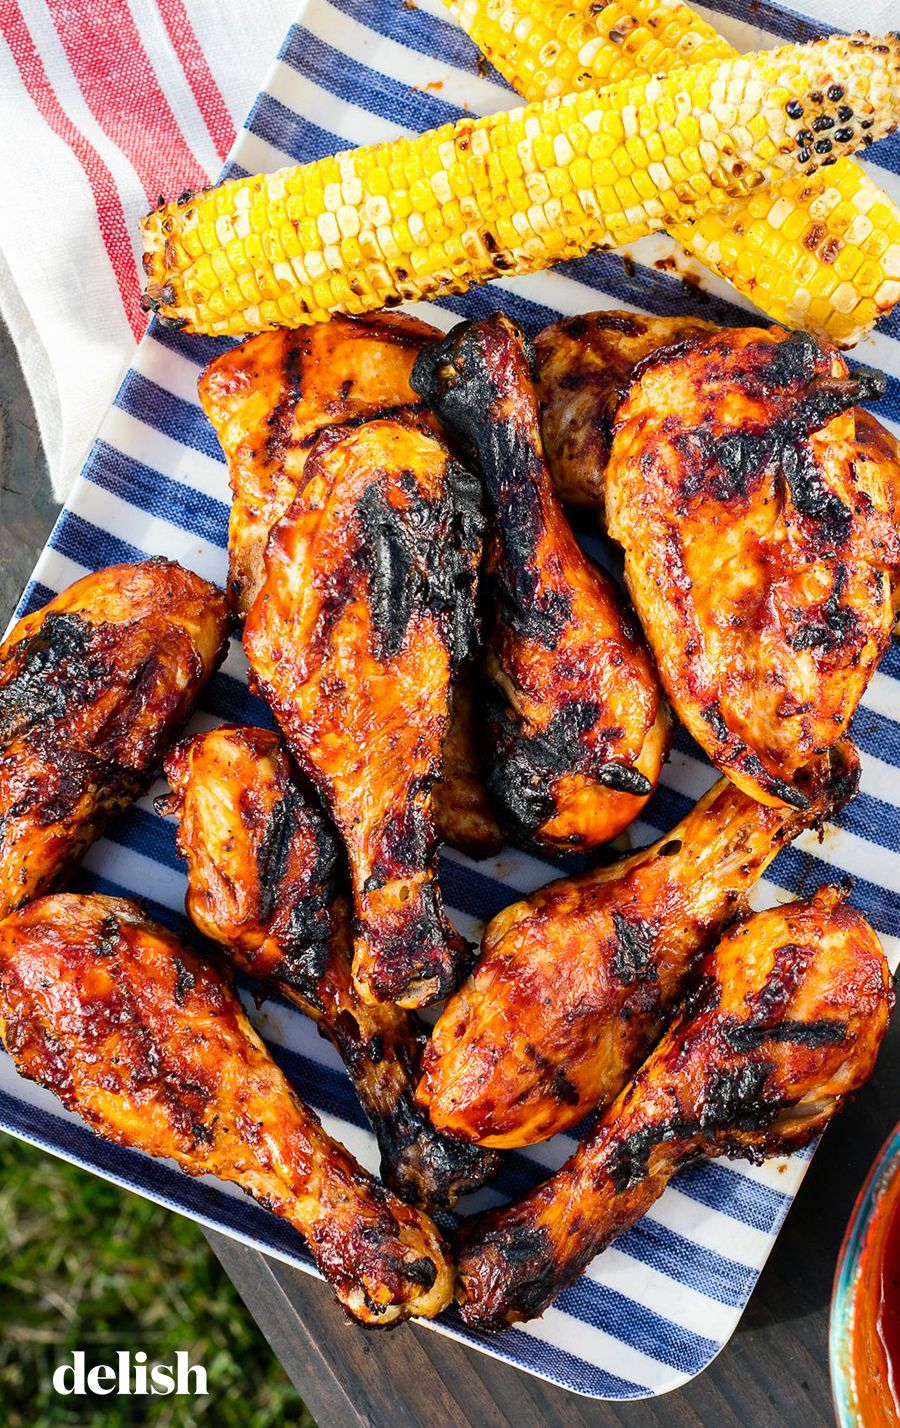 100 Best Grilling Ideas & Recipes – Things To Cook On The Grill